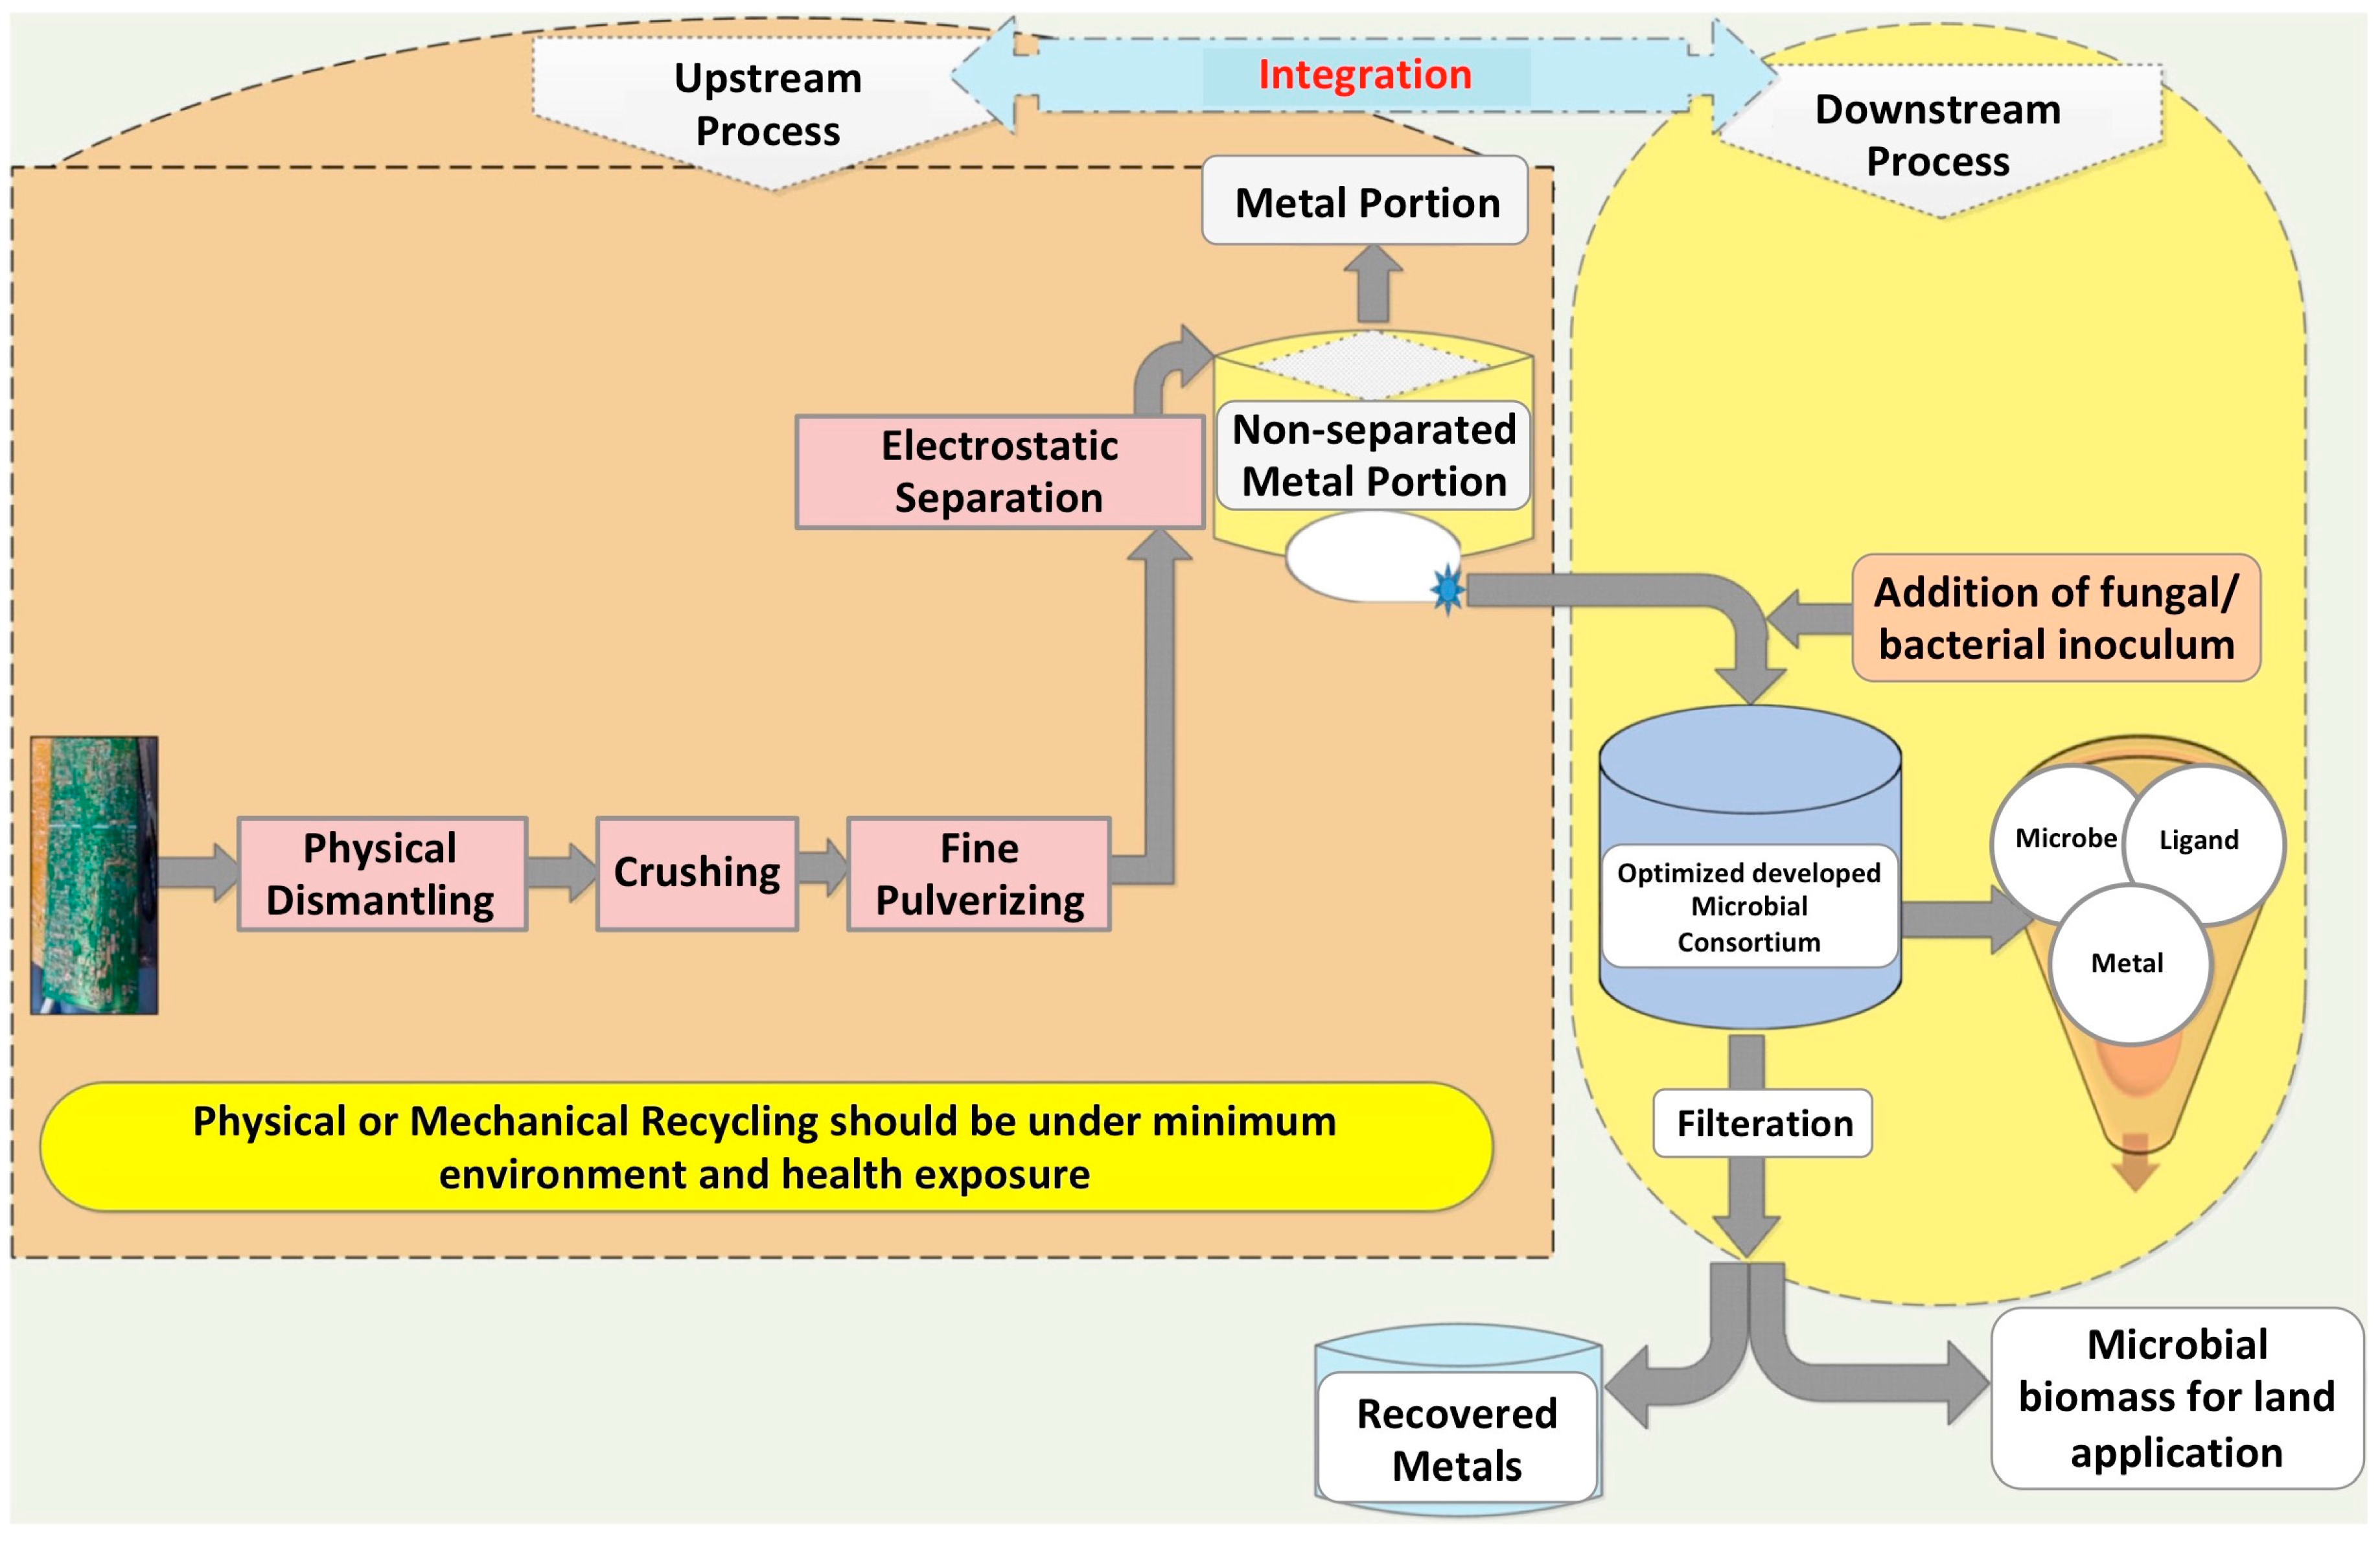 Copper Extraction Process Flow Chart